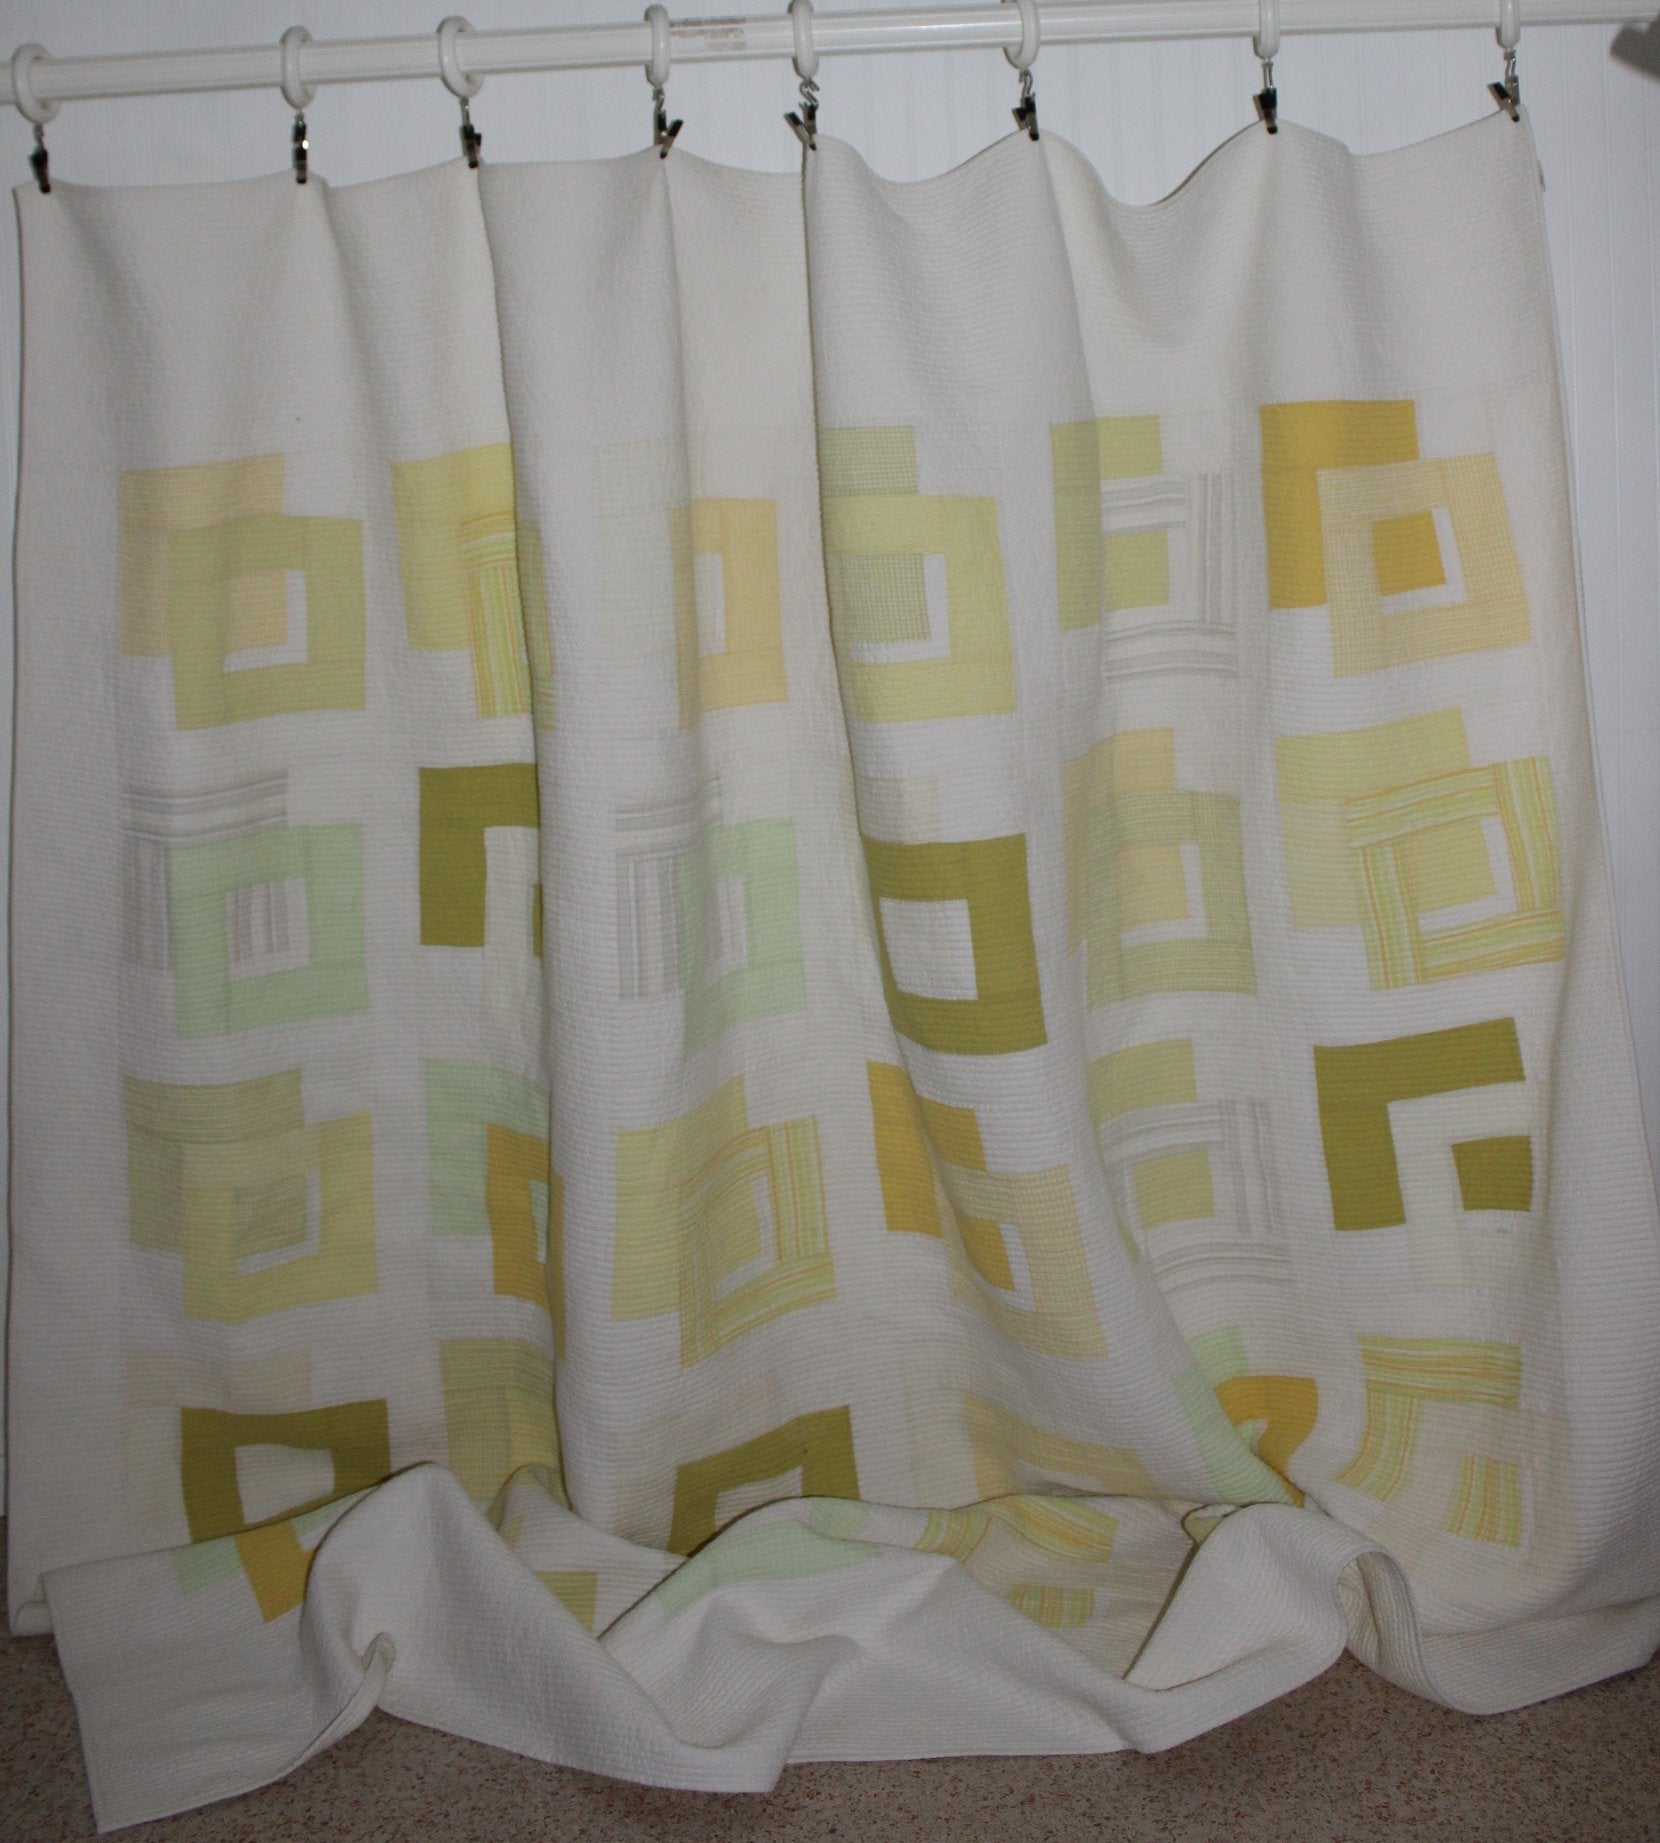 Crate Barrel Quilt King 104" X 94" Edgebrook All Cotton Geometric Mod Yellows Greens White very heavy